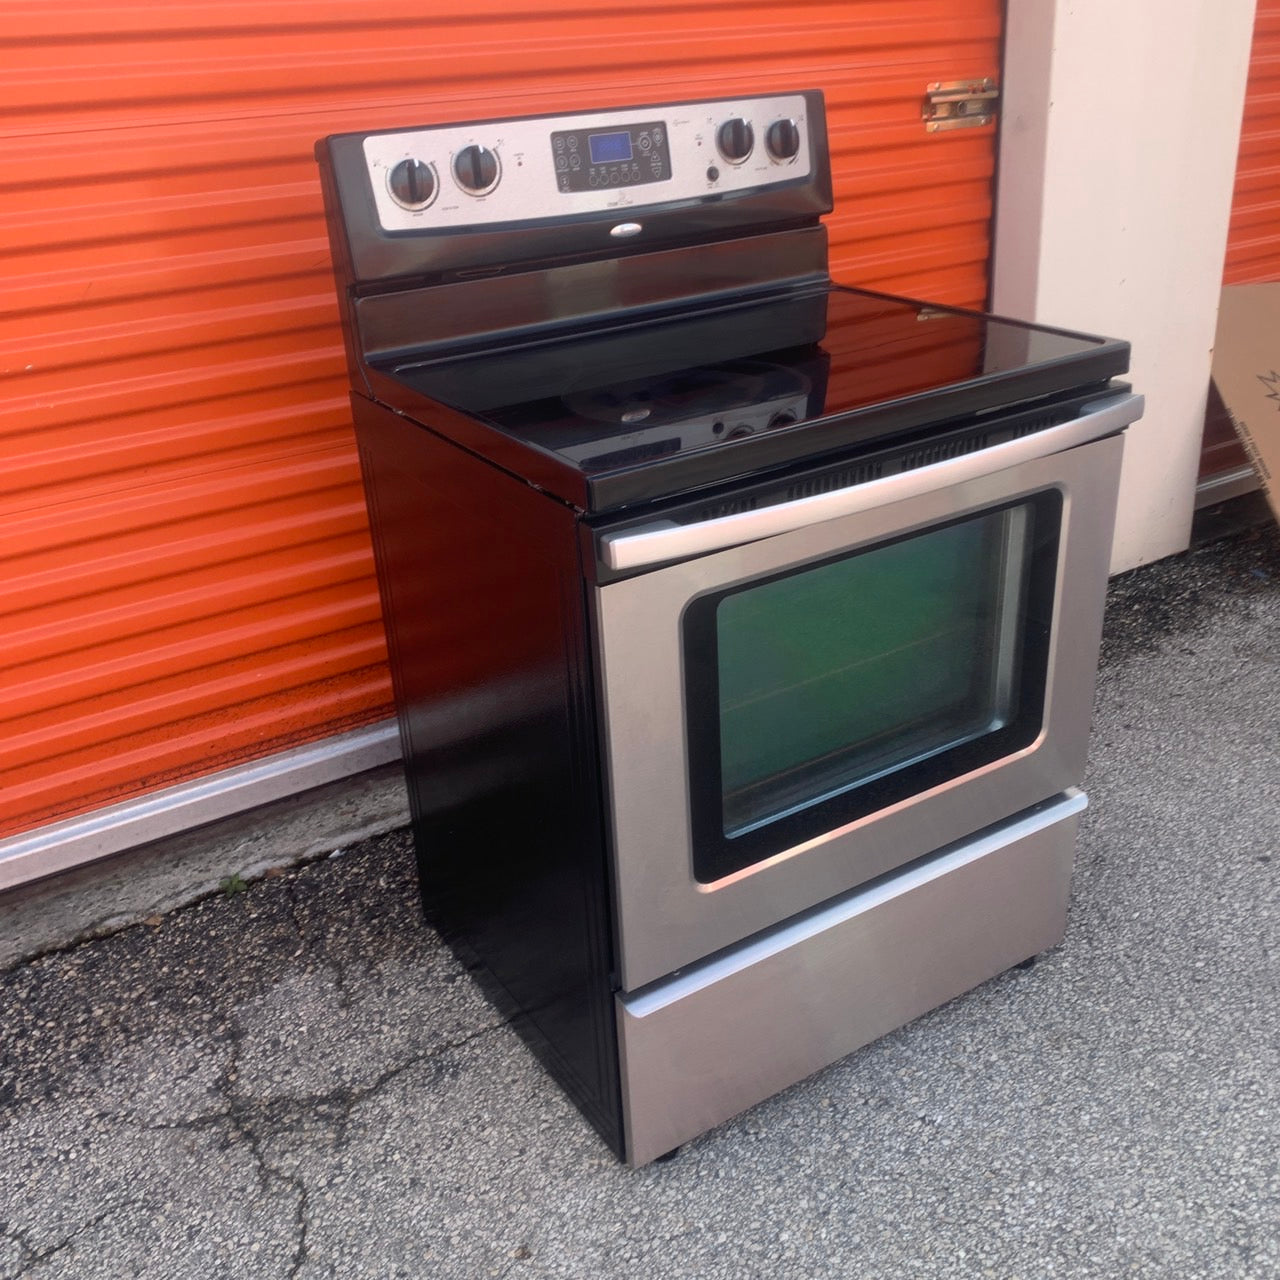 Whirlpool Stainless Steel Electric Stove